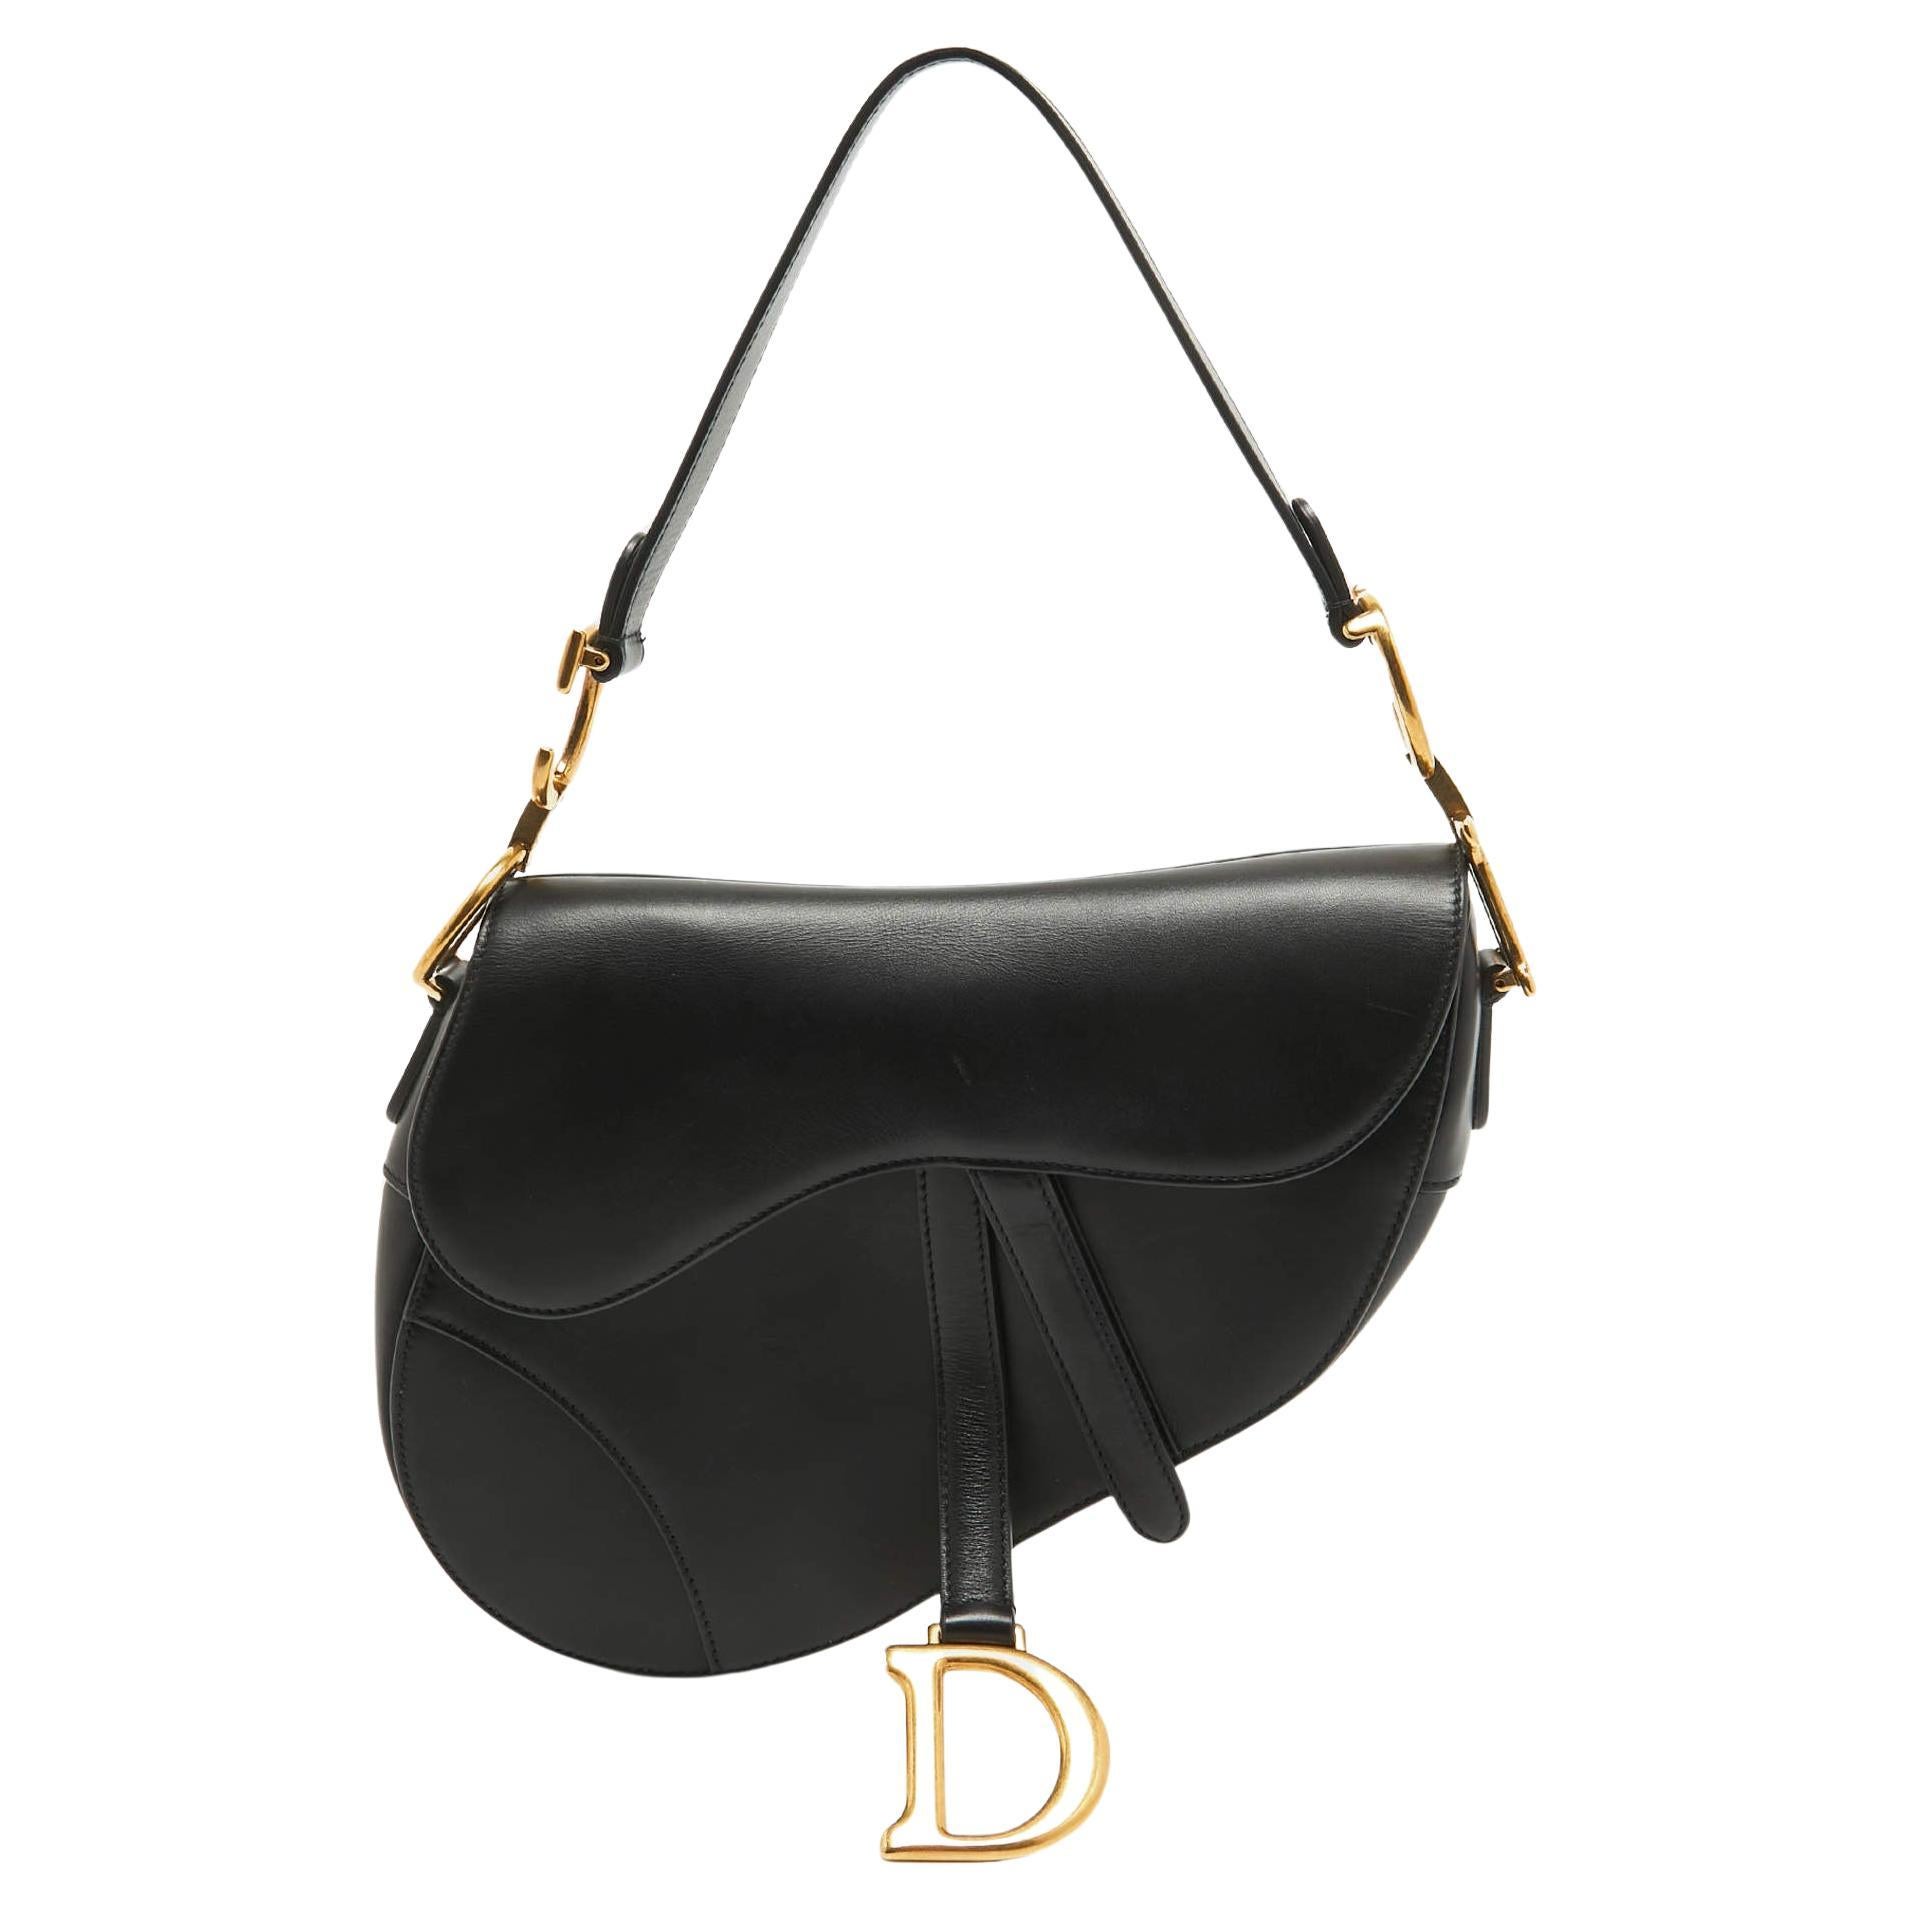 Does Dior saddle bag comes with a strap?